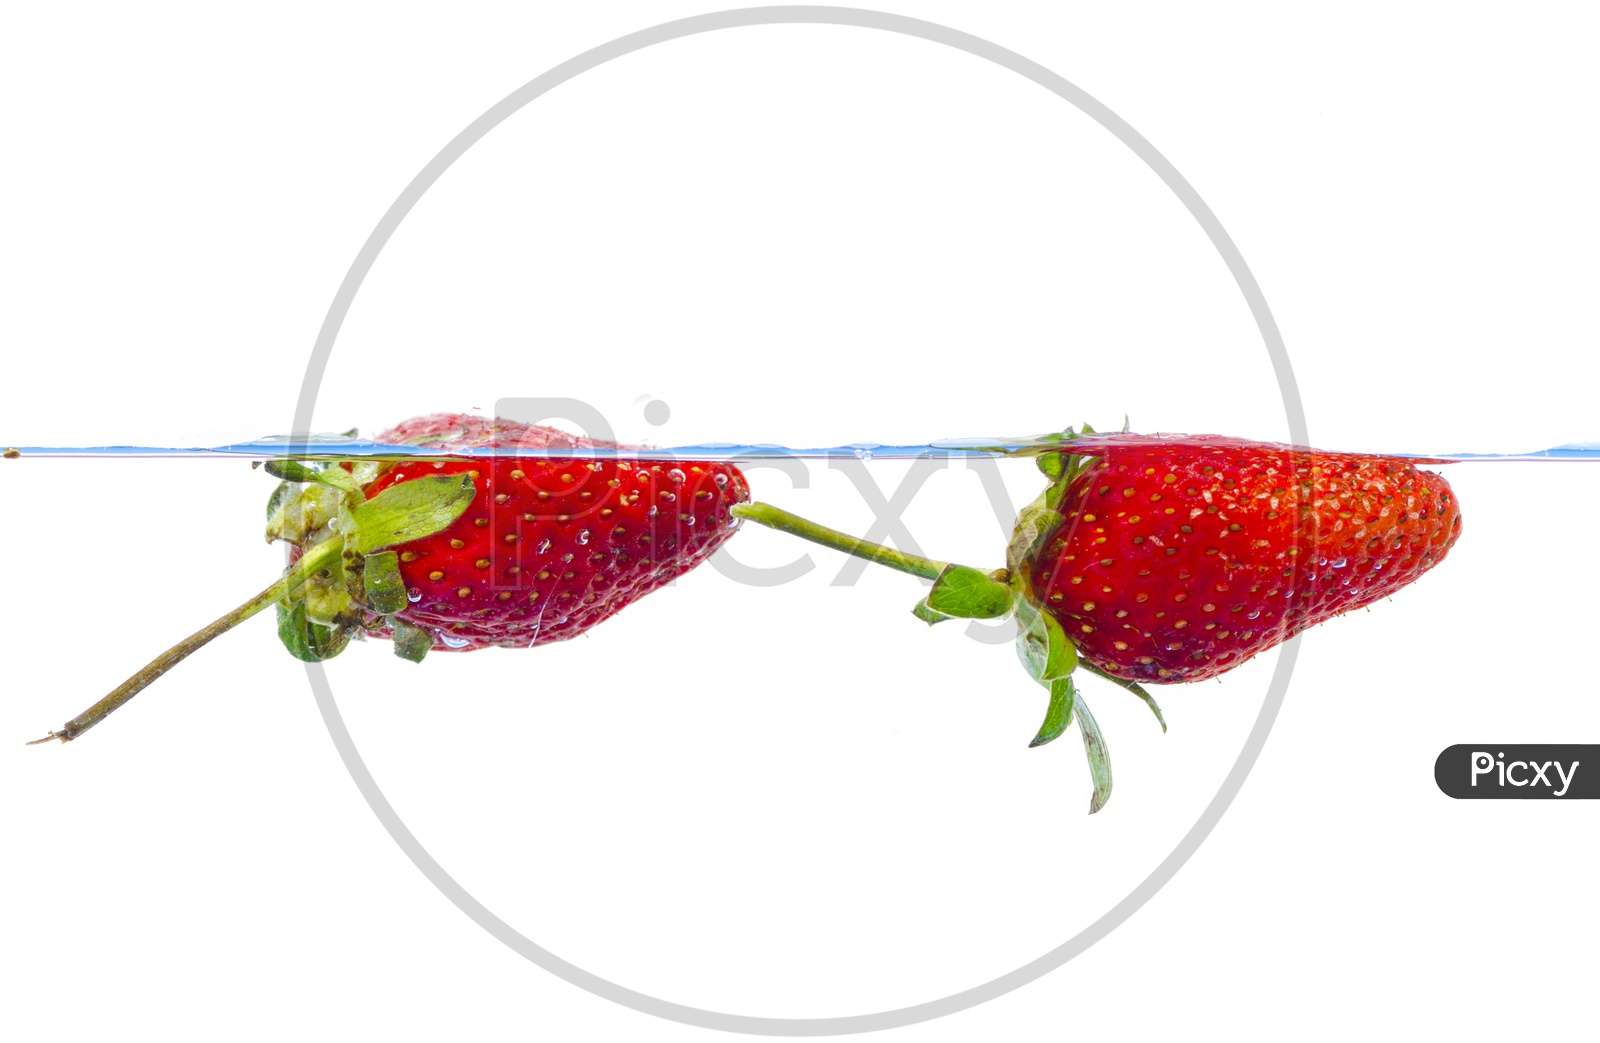 fresh strawberry dropped into water with splash on white background